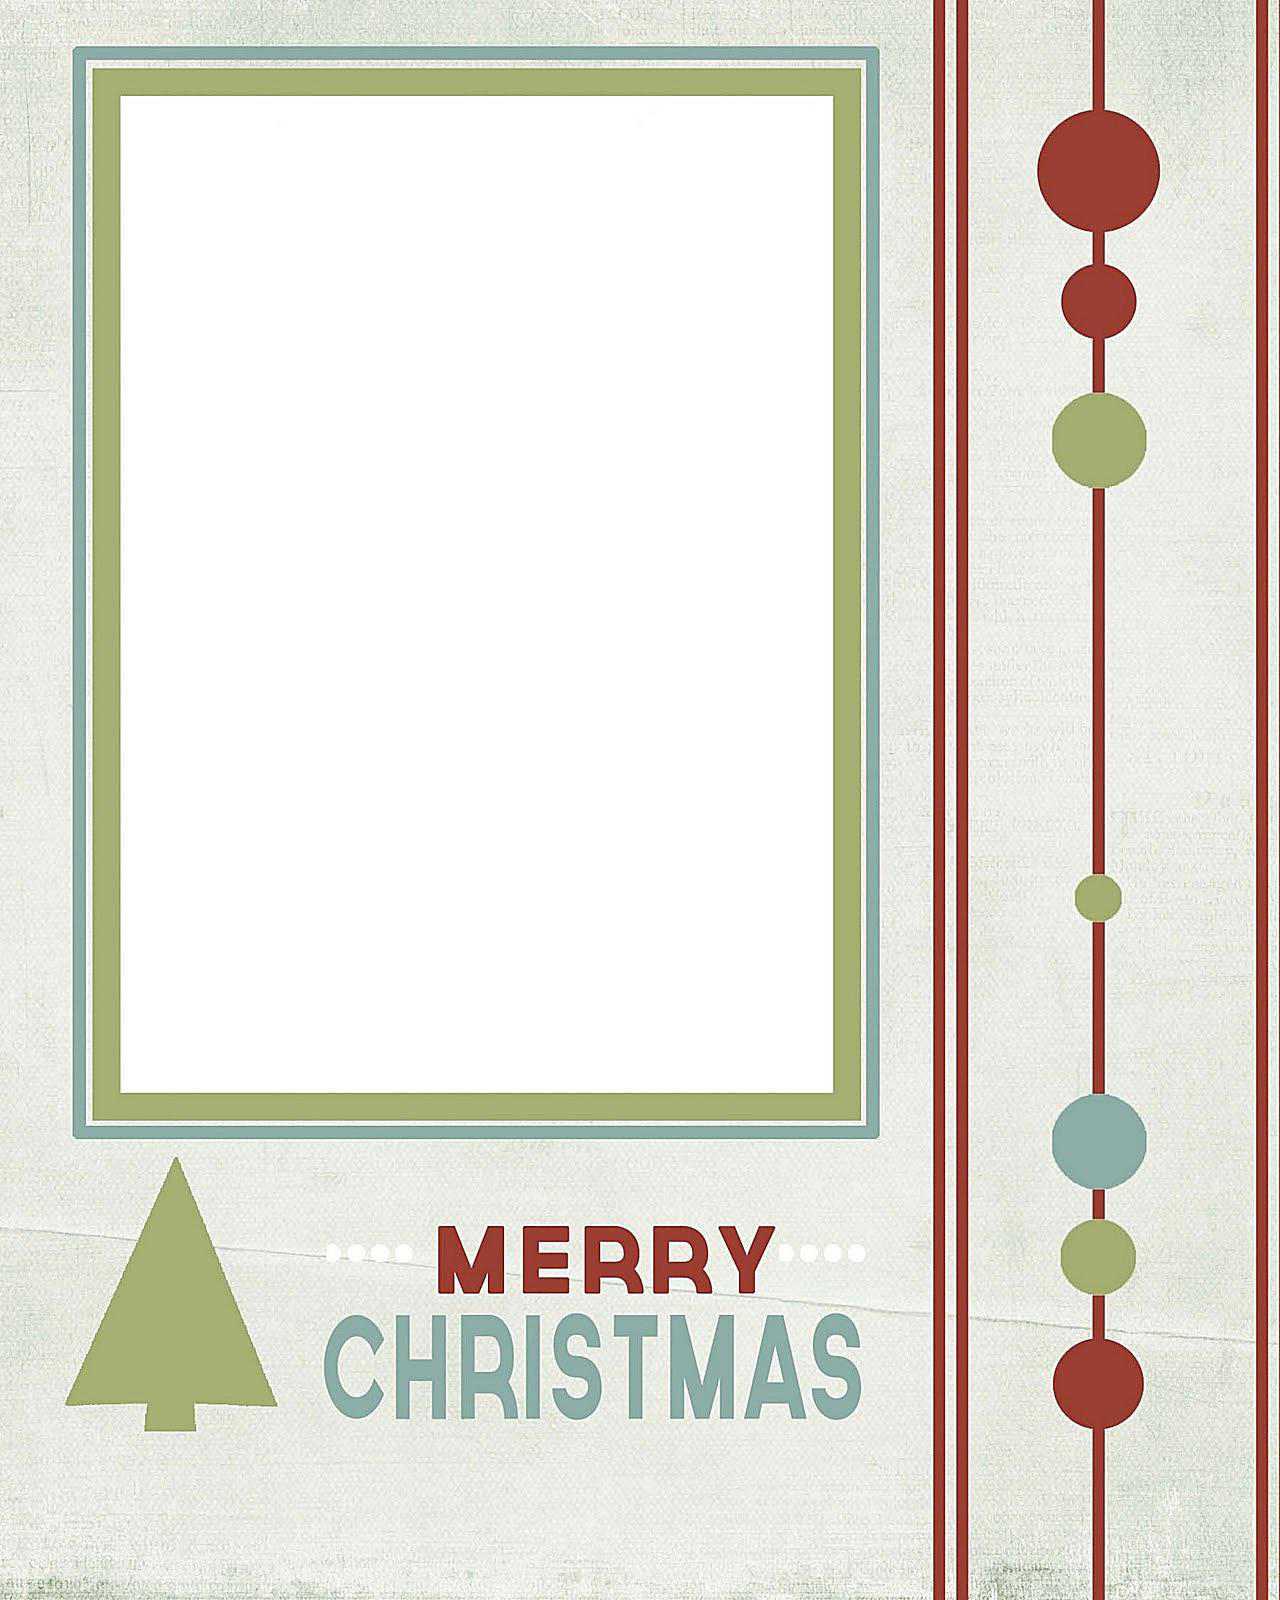 Christmas Cards Photo Template - Milas.westernscandinavia For Print Your Own Christmas Cards Templates